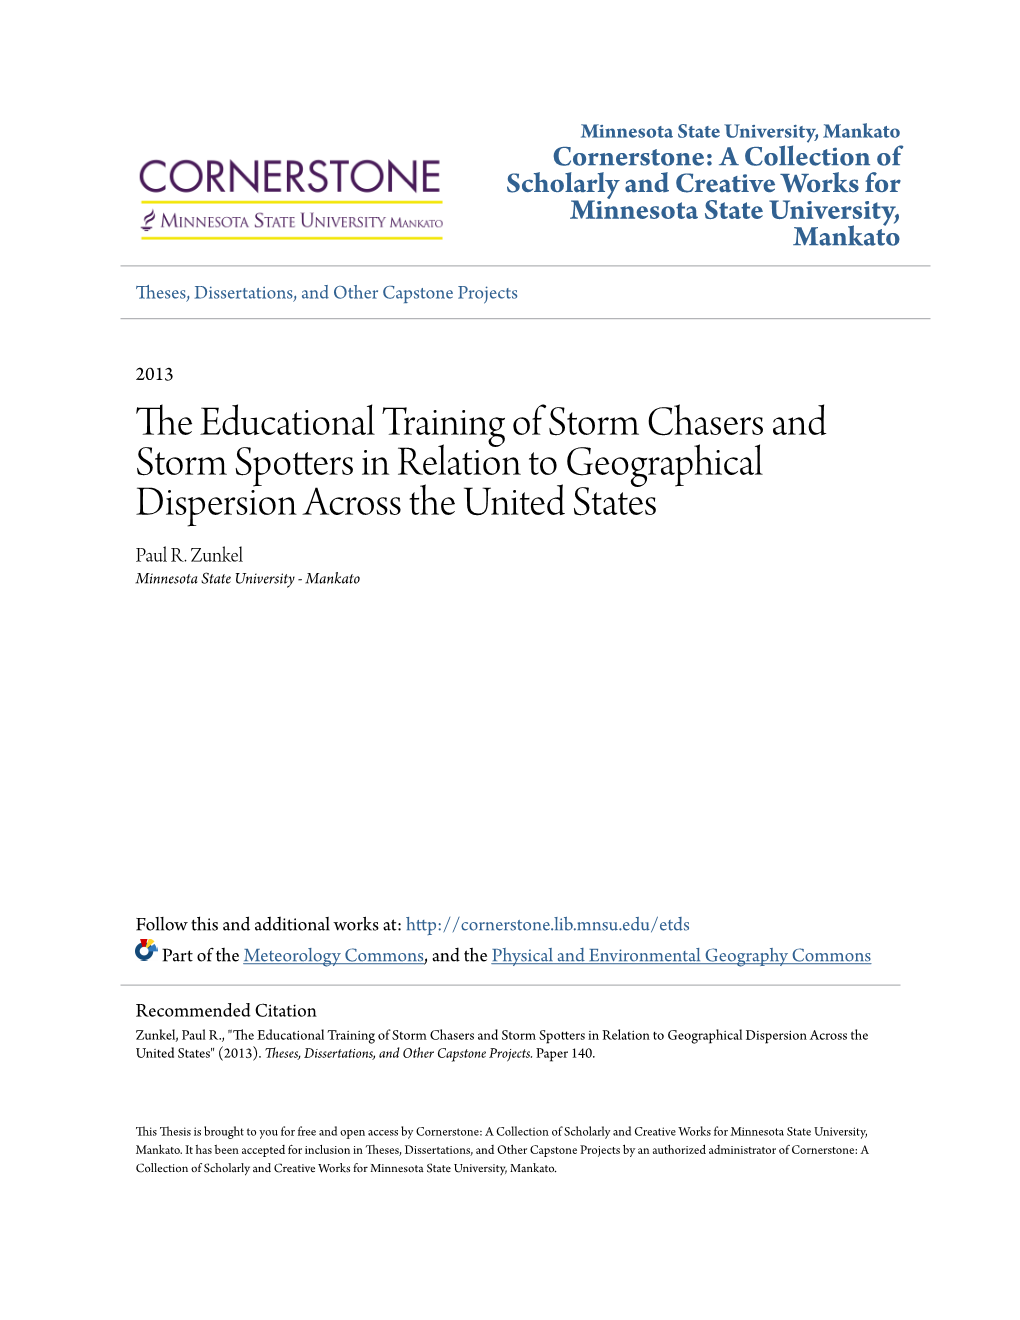 The Educational Training of Storm Chasers and Storm Spotters in Relation to Geographical Dispersion Across the United States